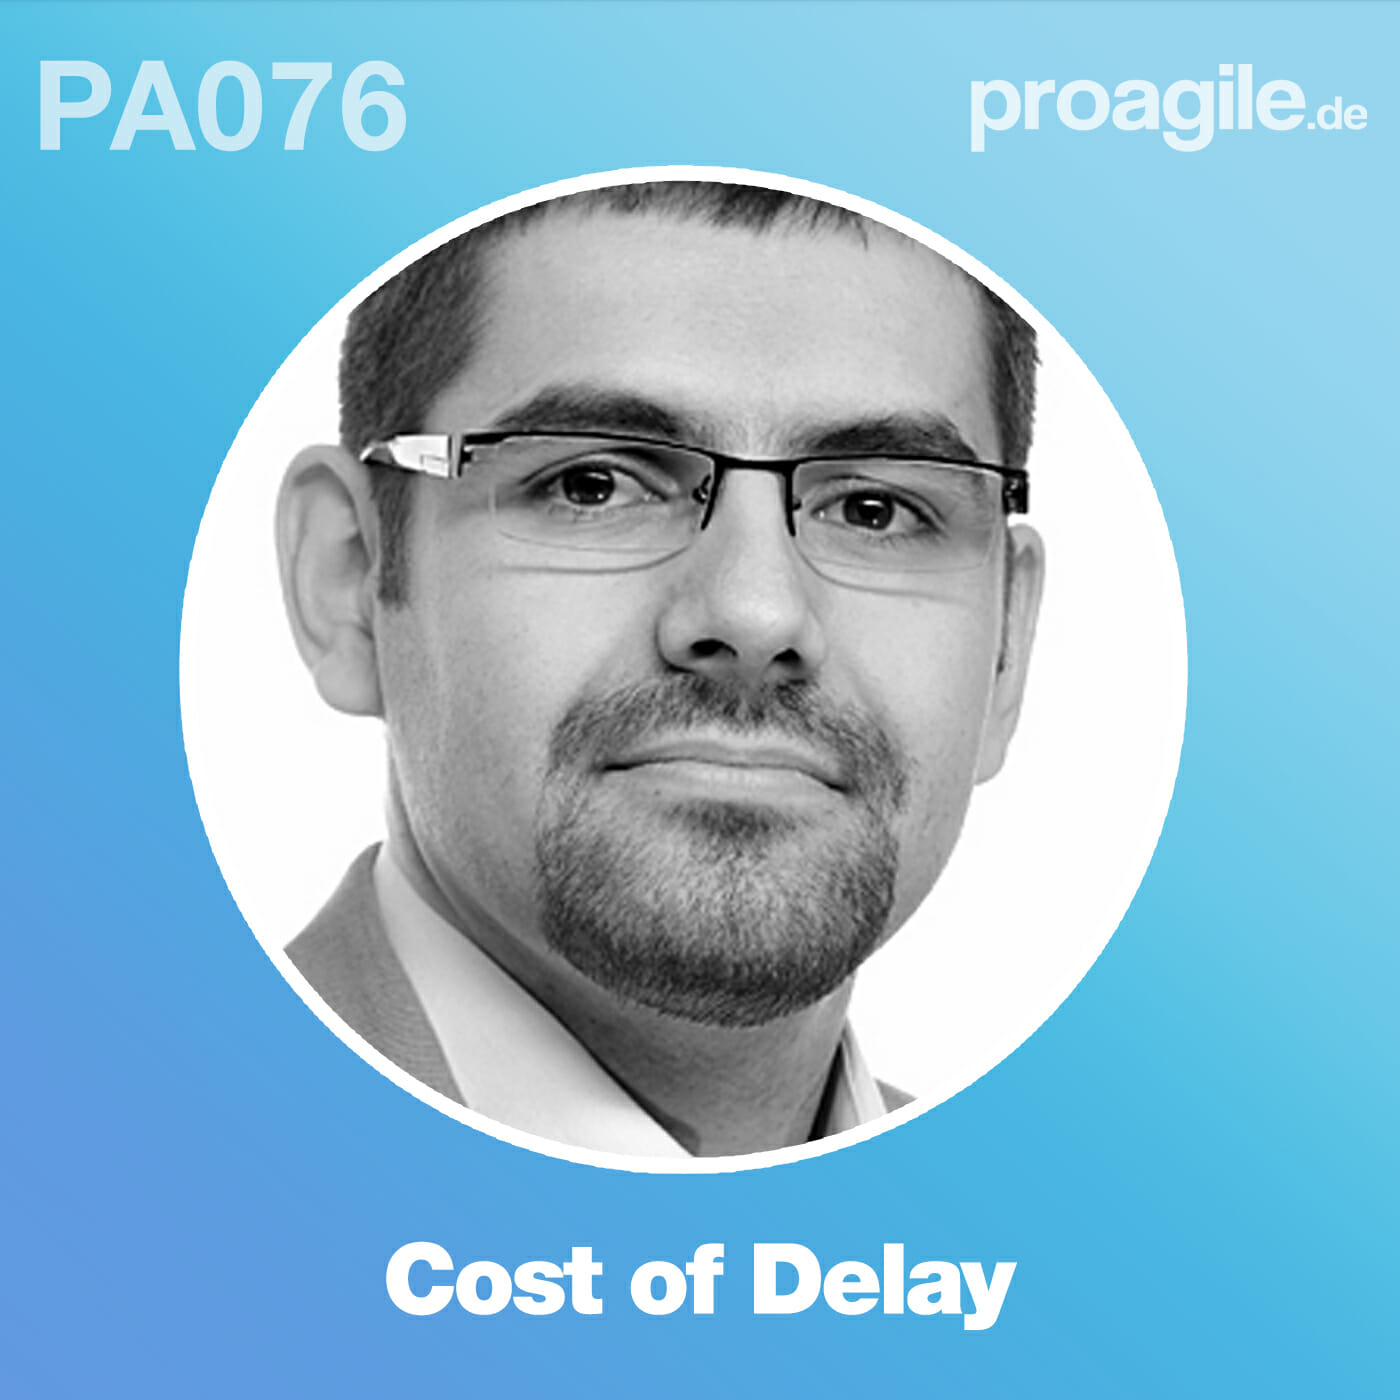 PA076 Cost of Delay